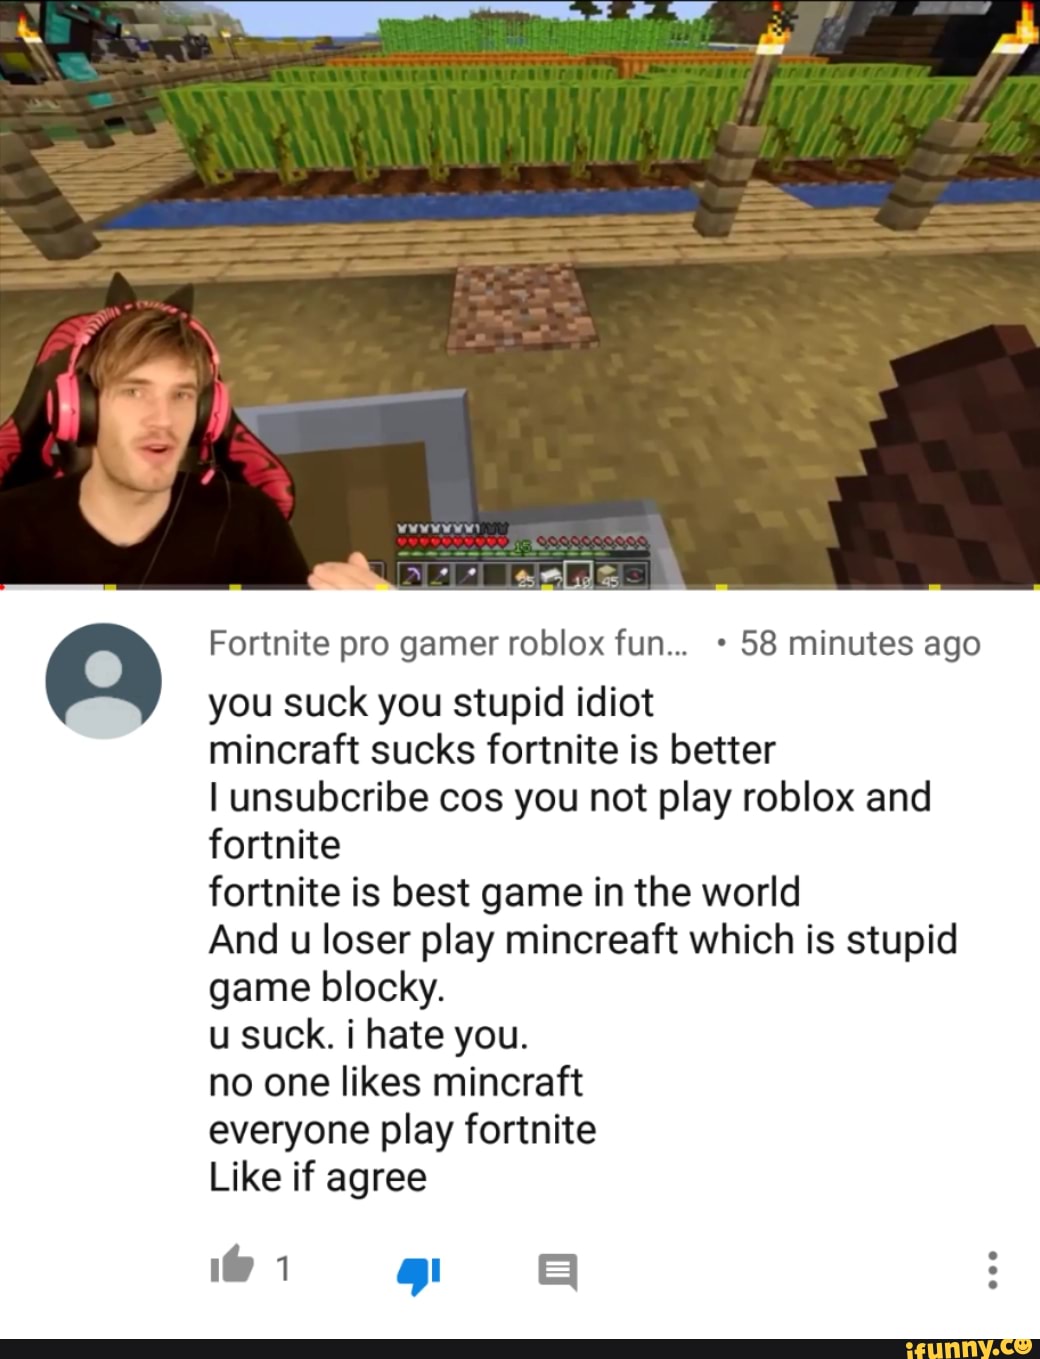 Fortnite Pro Gamer Roblox Fun 58 Minutes Ago You Suck You Stupid Idiot Mincraft Sucks Fortnite Is Better I Unsubcribe Cos You Not Play Roblox And Fortnite Fortnite Is Best Game - roblox are you have stupid